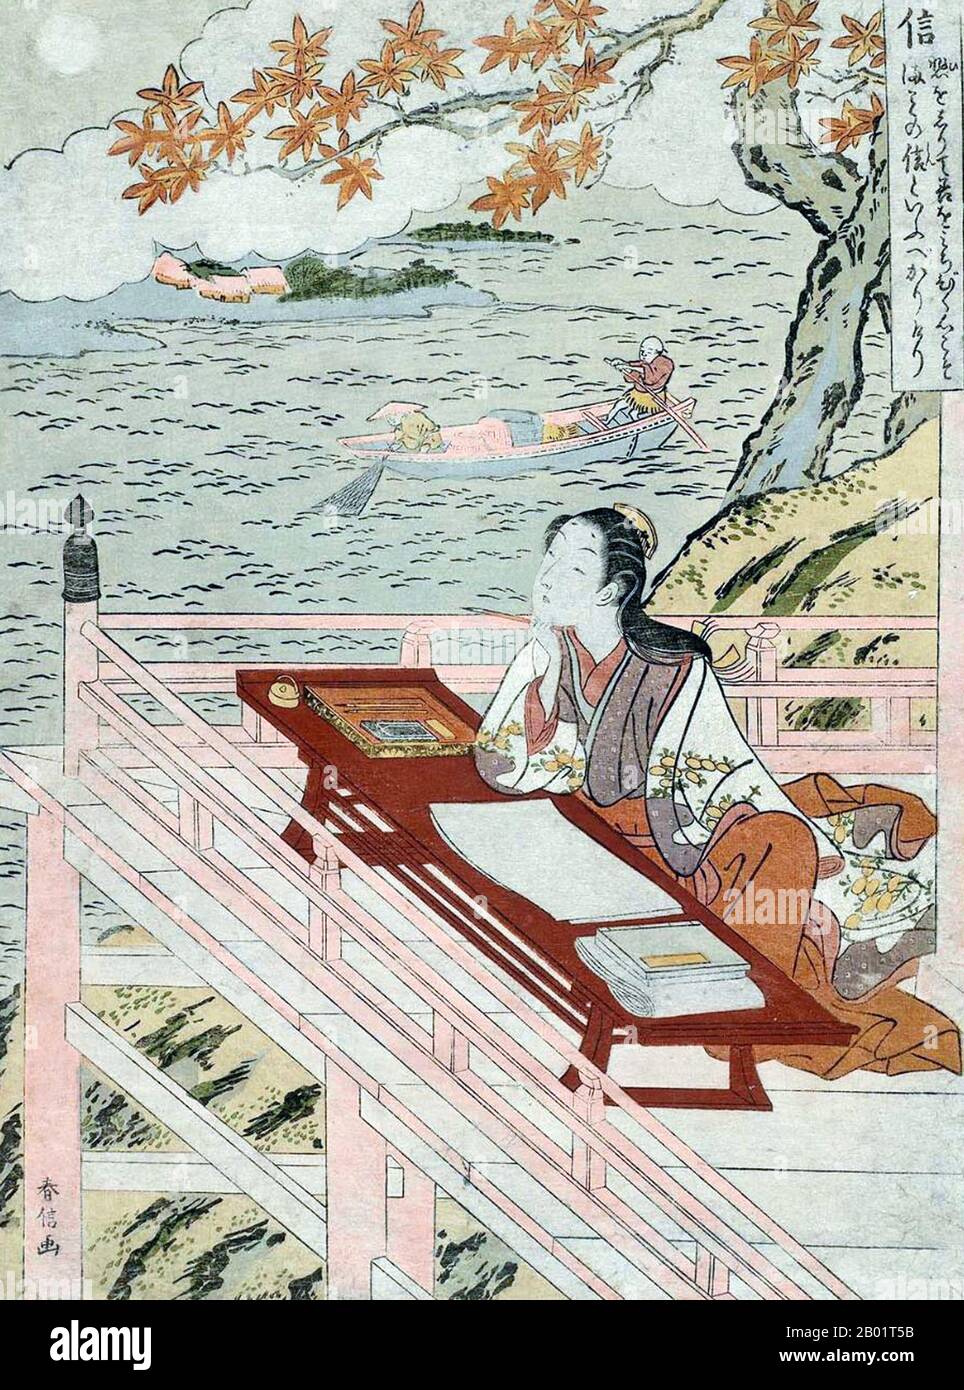 Japan: Lady Murasaki Shikibu (c. 973-1025), poet and novelist, writing at Ishiyama-dera. Ukiyo-e woodblock print by Harunobu Suzuki (1727 - 29 June 1770), c. 1767.  Murasaki Shikibu was a Japanese novelist, poet and lady-in-waiting at the Imperial court during the Heian period. She is best known as the author of 'The Tale of Genji', written in Japanese between about 1000 and 1012. Murasaki Shikibu is a nickname; her real name is unknown, but she may have been Fujiwara Takako, who was mentioned in a 1007 court diary as an imperial lady-in-waiting. Stock Photo